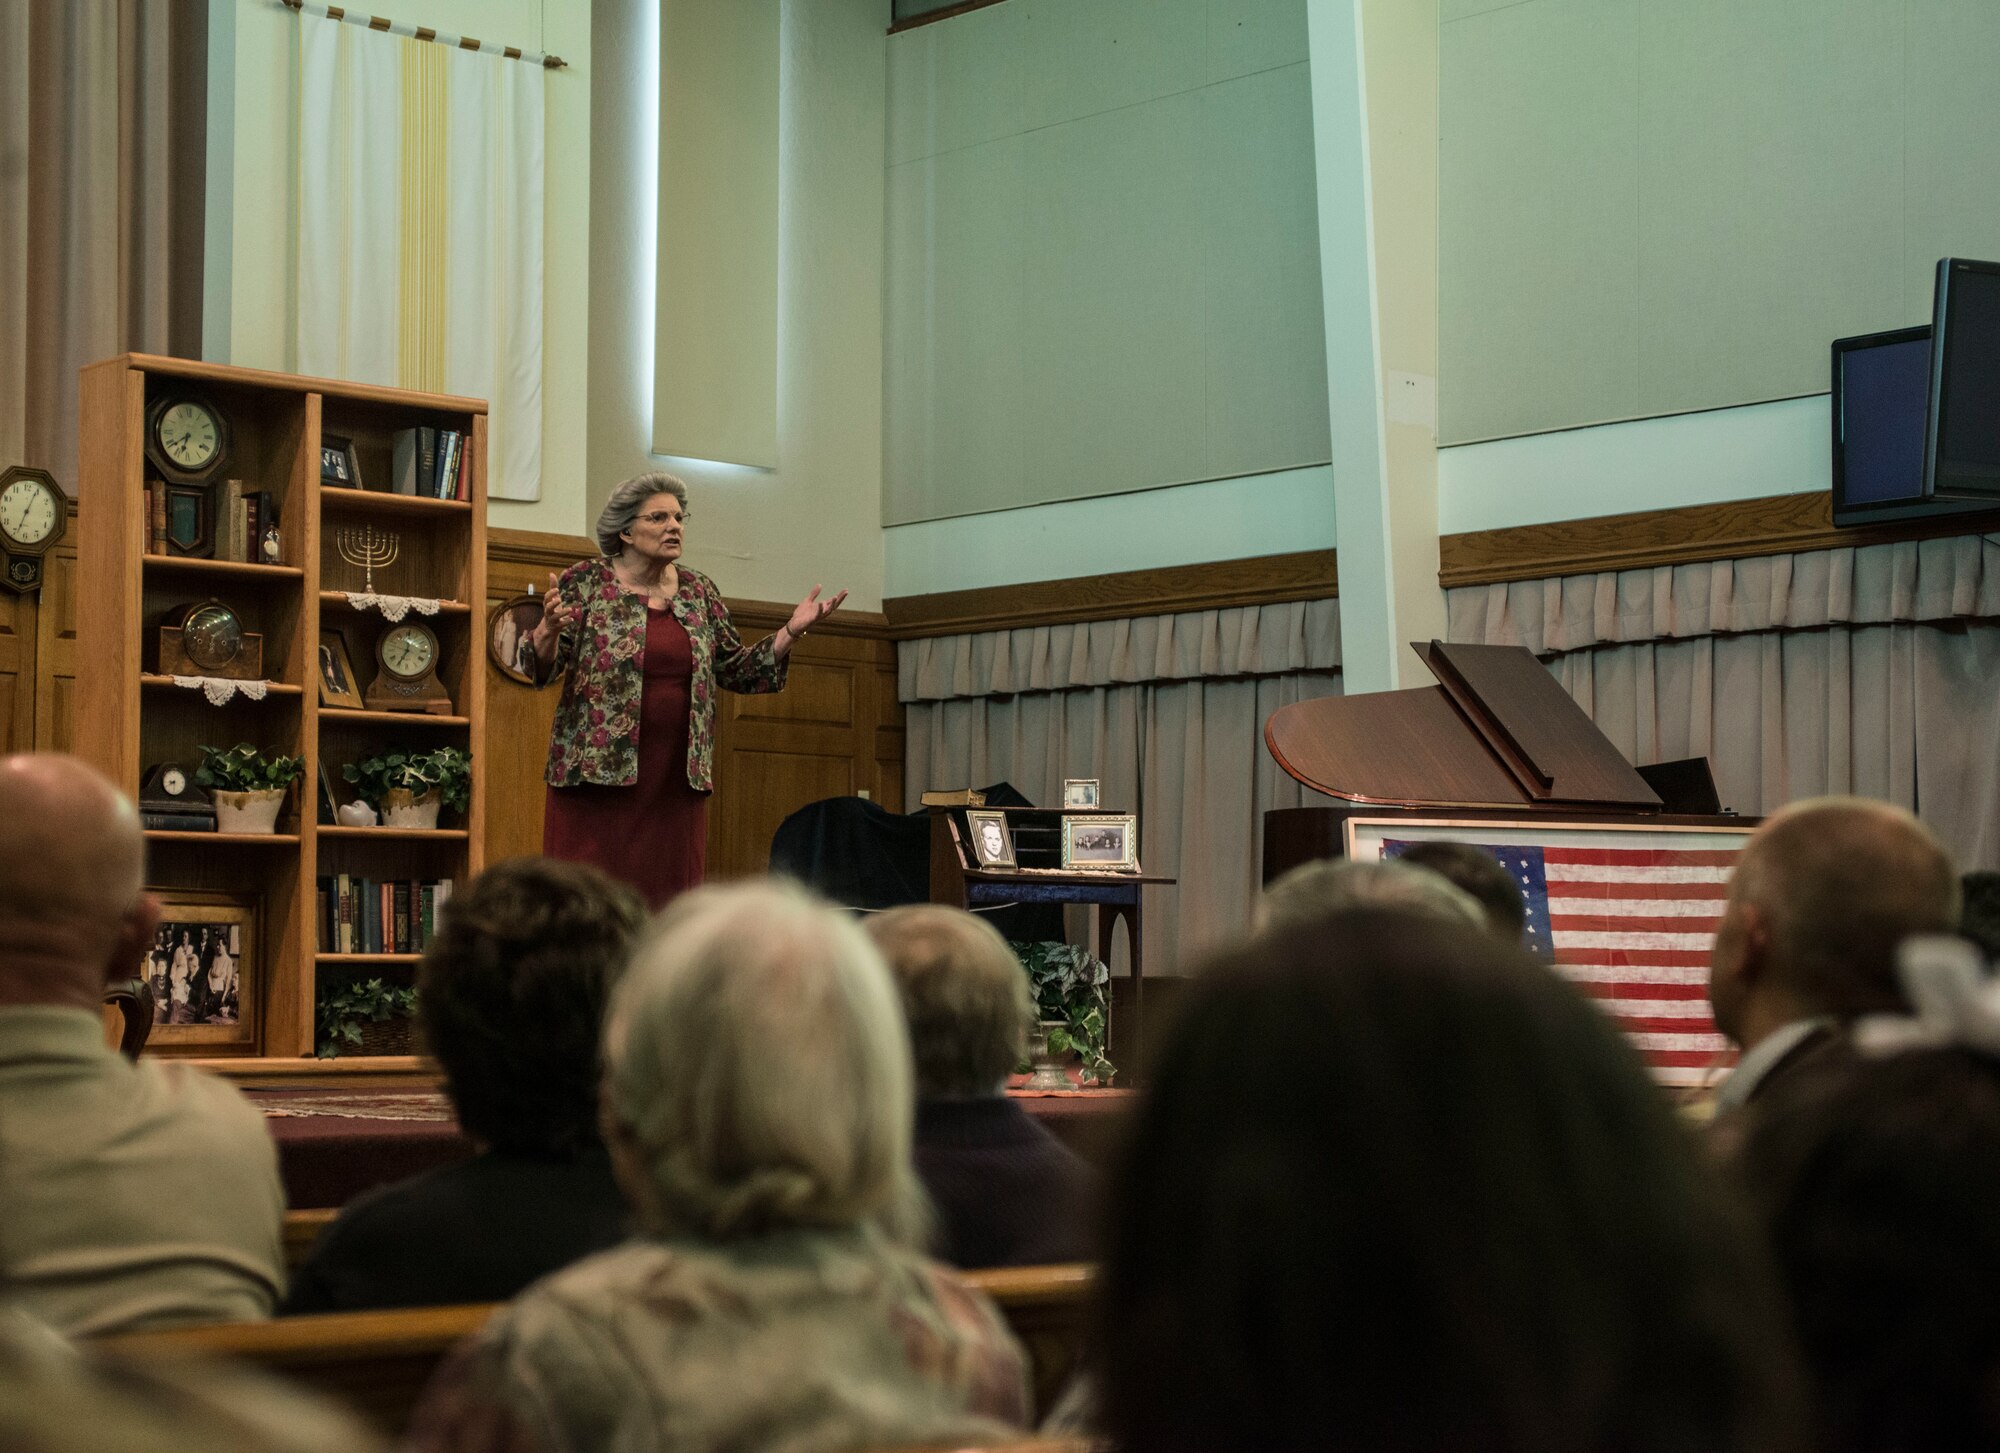 Susie Sandager acts out scenes describing the younger years of Corrie Ten Boom’s life during the play “Corrie Remembers” at Kirtland Air Force Base, N.M., May 3, 2019. Corrie Ten Boom was a Christian woman who saved the lives of nearly 800 Jewish people during the Holocaust.